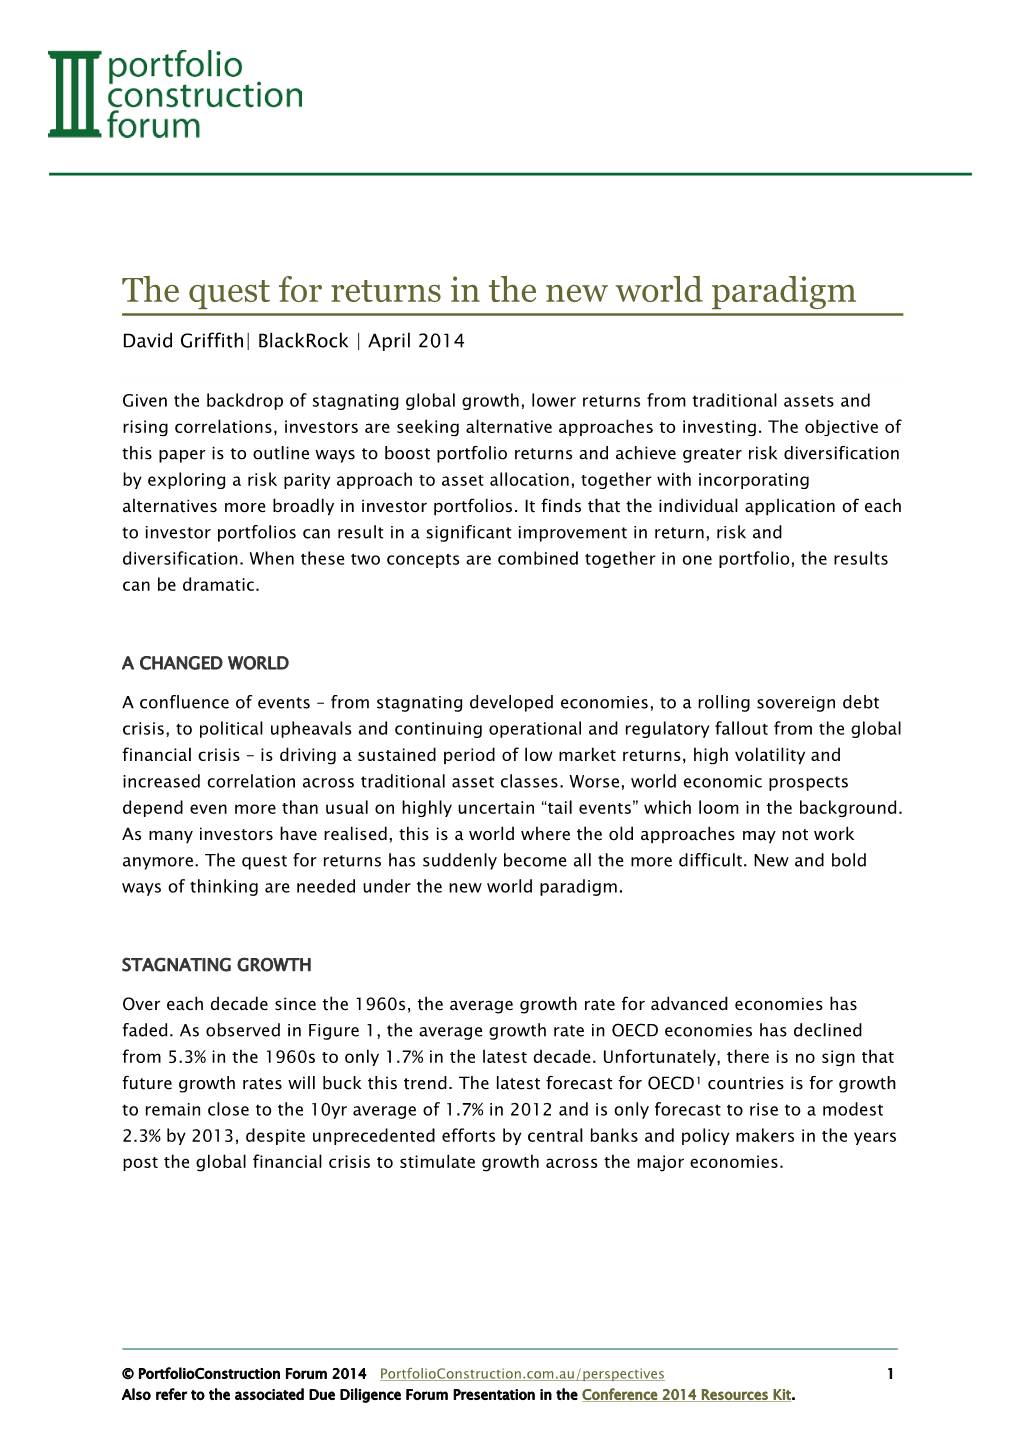 The Quest for Returns in the New World Paradigm